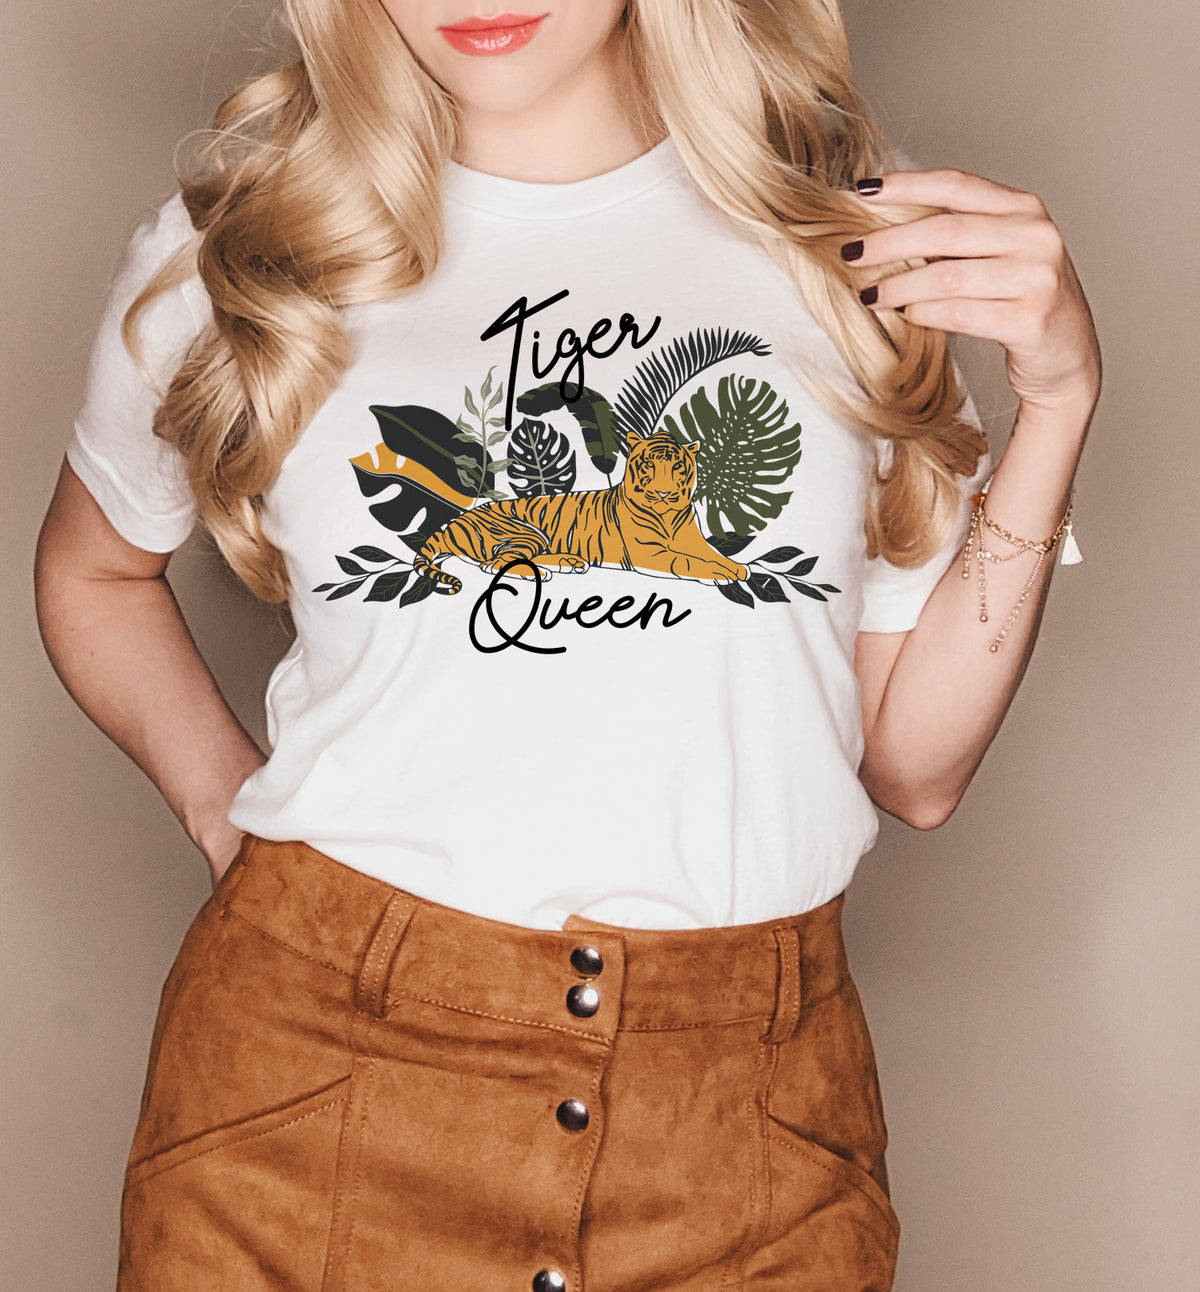 White shirt with a tiger that says tiger queen - HighCiti